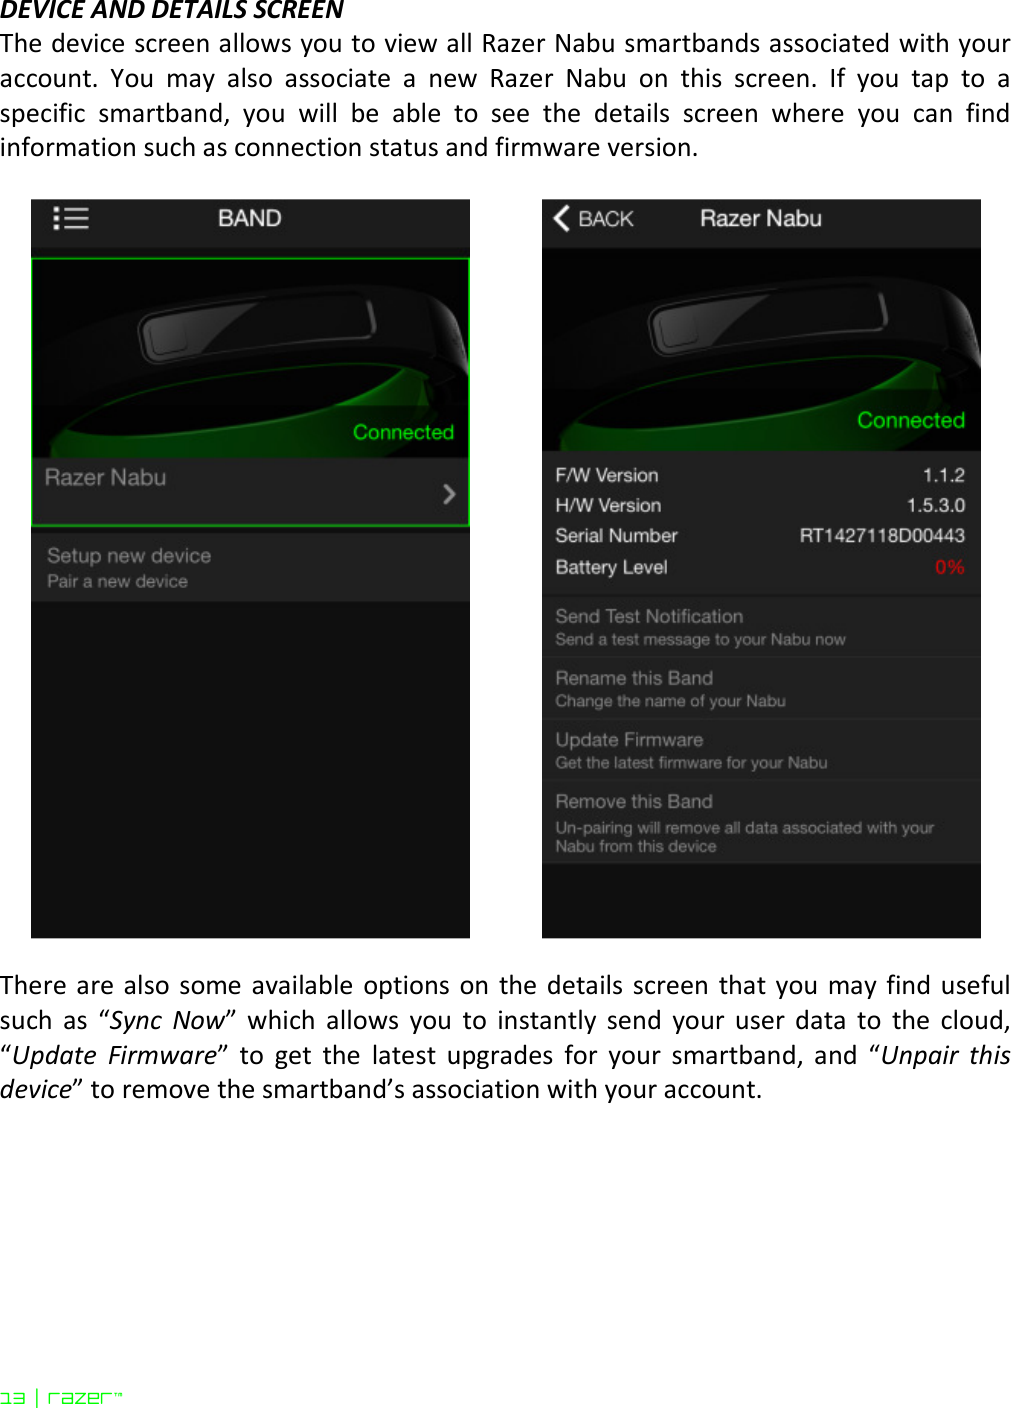  13 | razer™ DEVICE AND DETAILS SCREEN The device screen allows you to view all Razer Nabu smartbands associated with your account.  You  may  also  associate  a  new  Razer  Nabu  on  this  screen.  If  you  tap  to  a specific  smartband,  you  will  be  able  to  see  the  details  screen  where  you  can  find information such as connection status and firmware version.      There are also some available  options on the details screen  that you  may find useful such  as  “Sync  Now”  which  allows  you  to  instantly  send  your  user  data  to  the  cloud, “Update  Firmware”  to  get  the  latest  upgrades  for  your  smartband,  and  “Unpair  this device” to remove the smartband’s association with your account.   